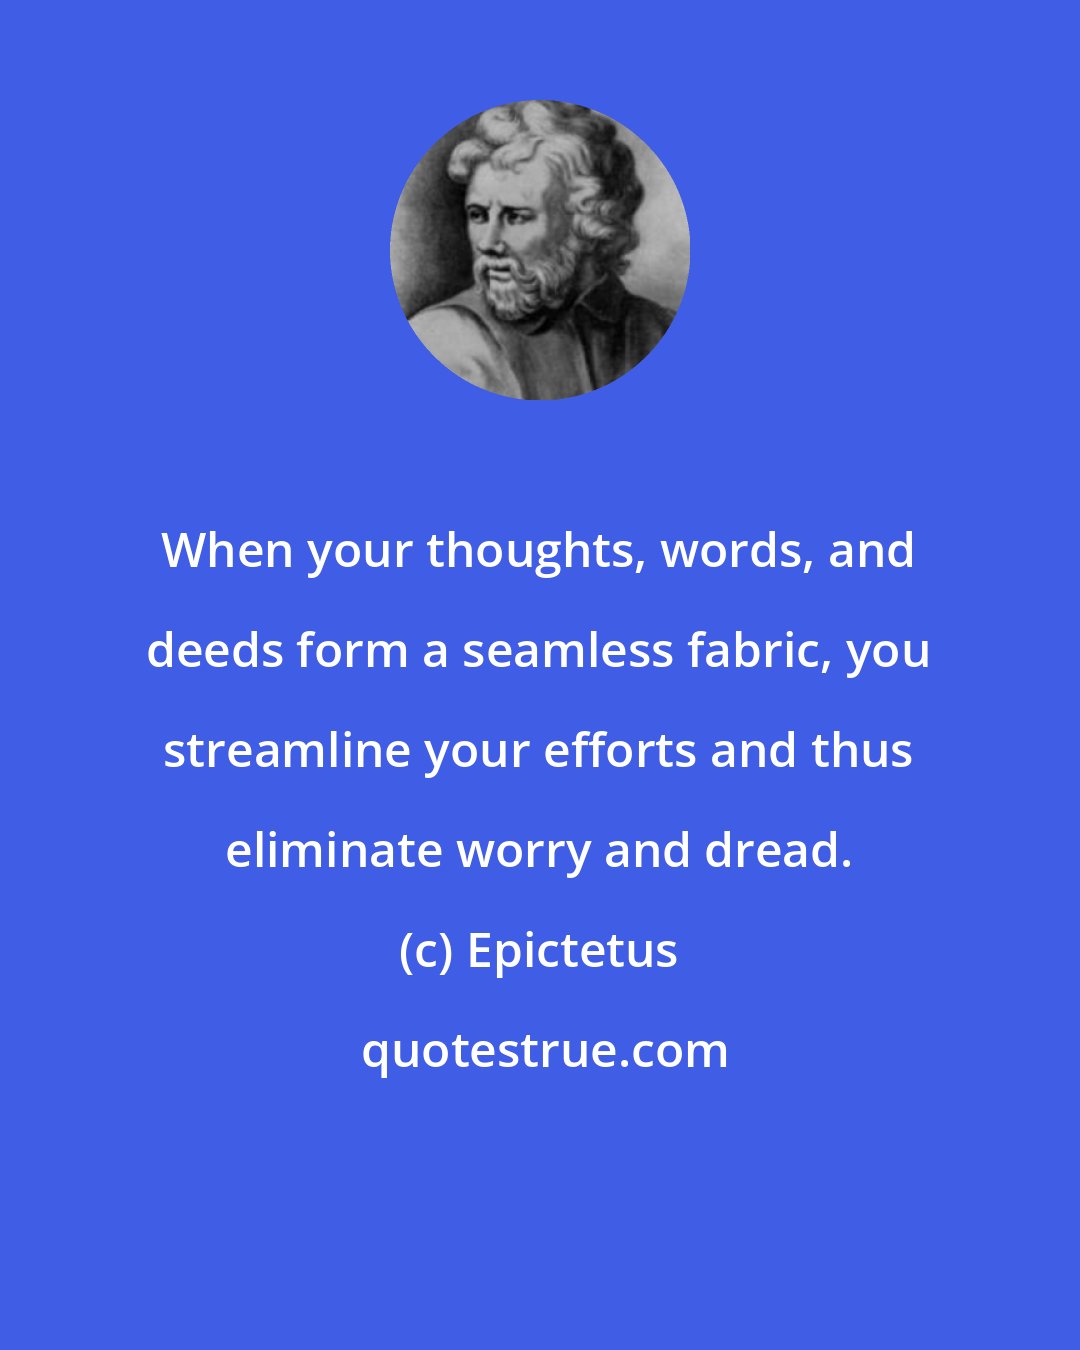 Epictetus: When your thoughts, words, and deeds form a seamless fabric, you streamline your efforts and thus eliminate worry and dread.